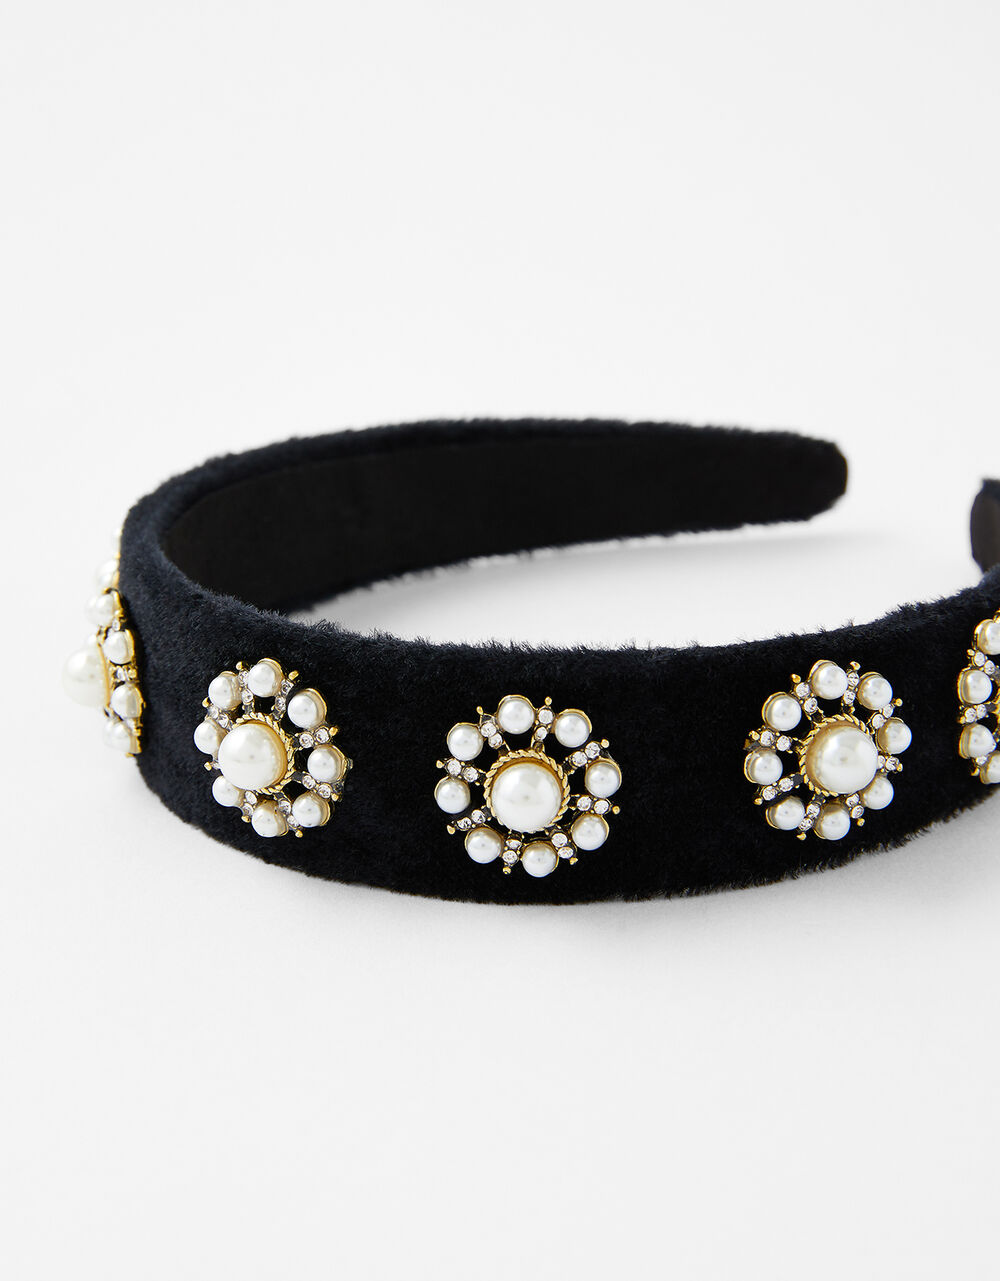 black Headband with pearl embellishment from accessorize